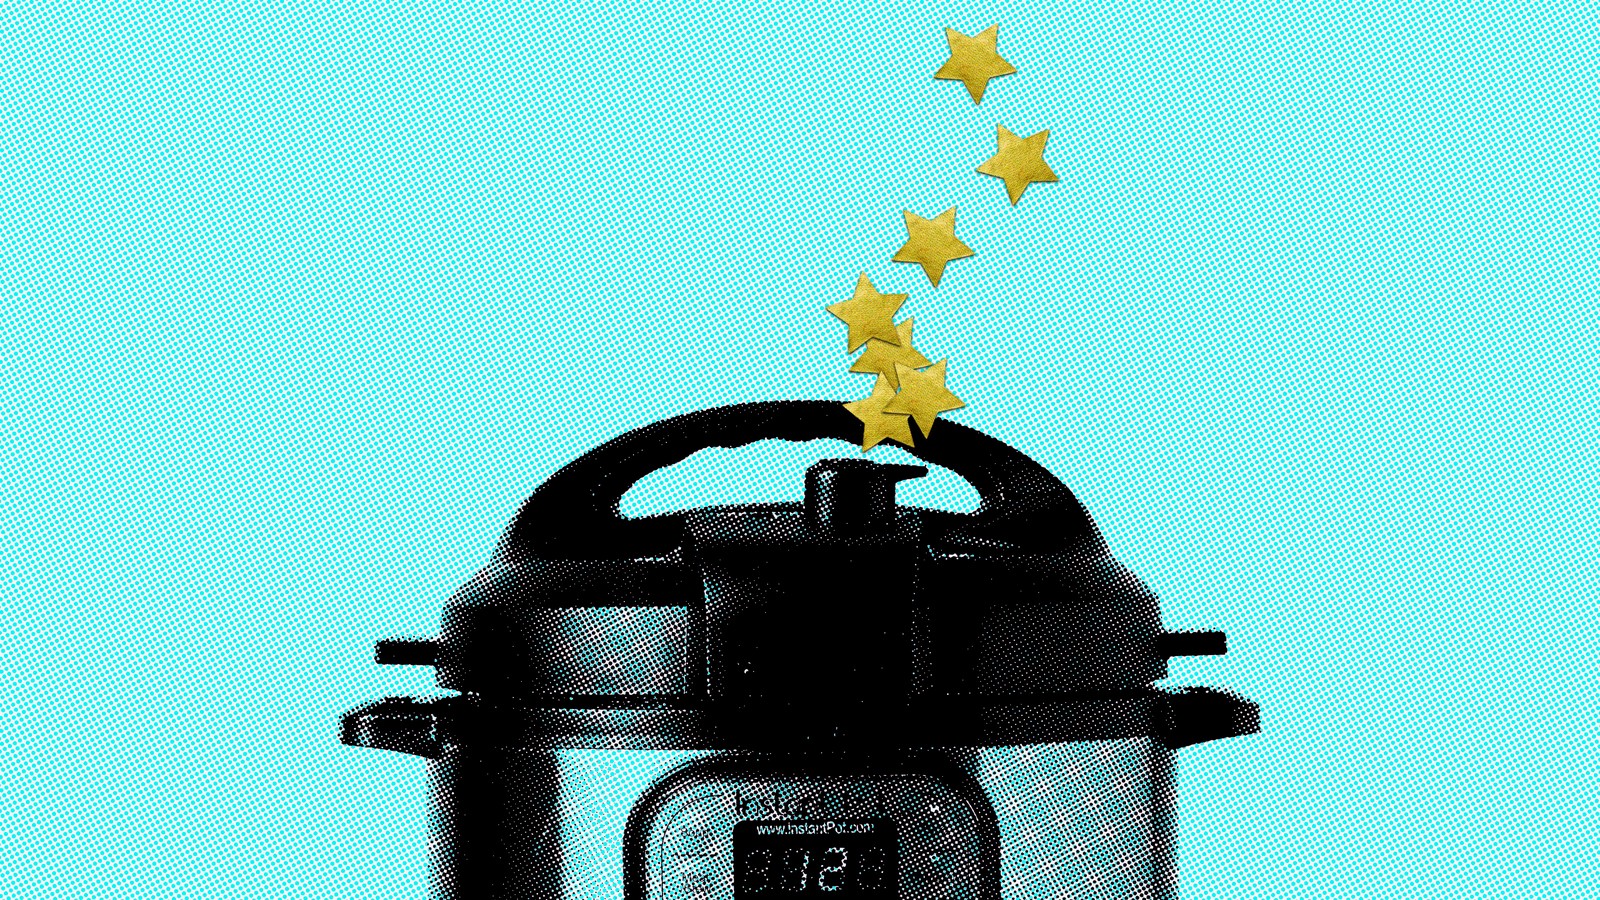 Instant Loss - #pottalk All Instant Pots are not created equal. This is one  of those cases where bigger is not always better. ⁣⁣ ⁣⁣ A question I  receive frequently is “Why